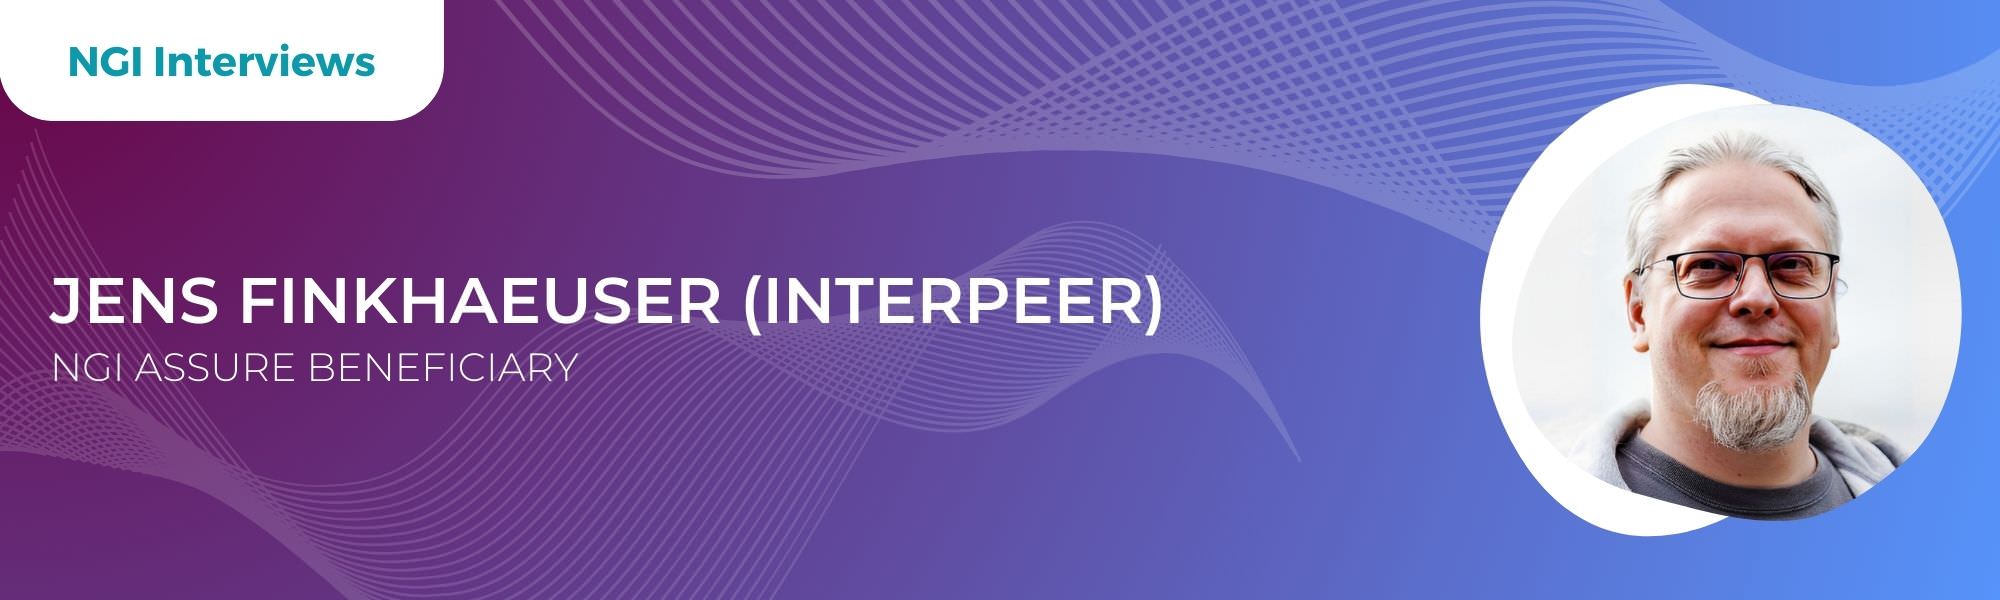 NGI Interview - Interpeer Project